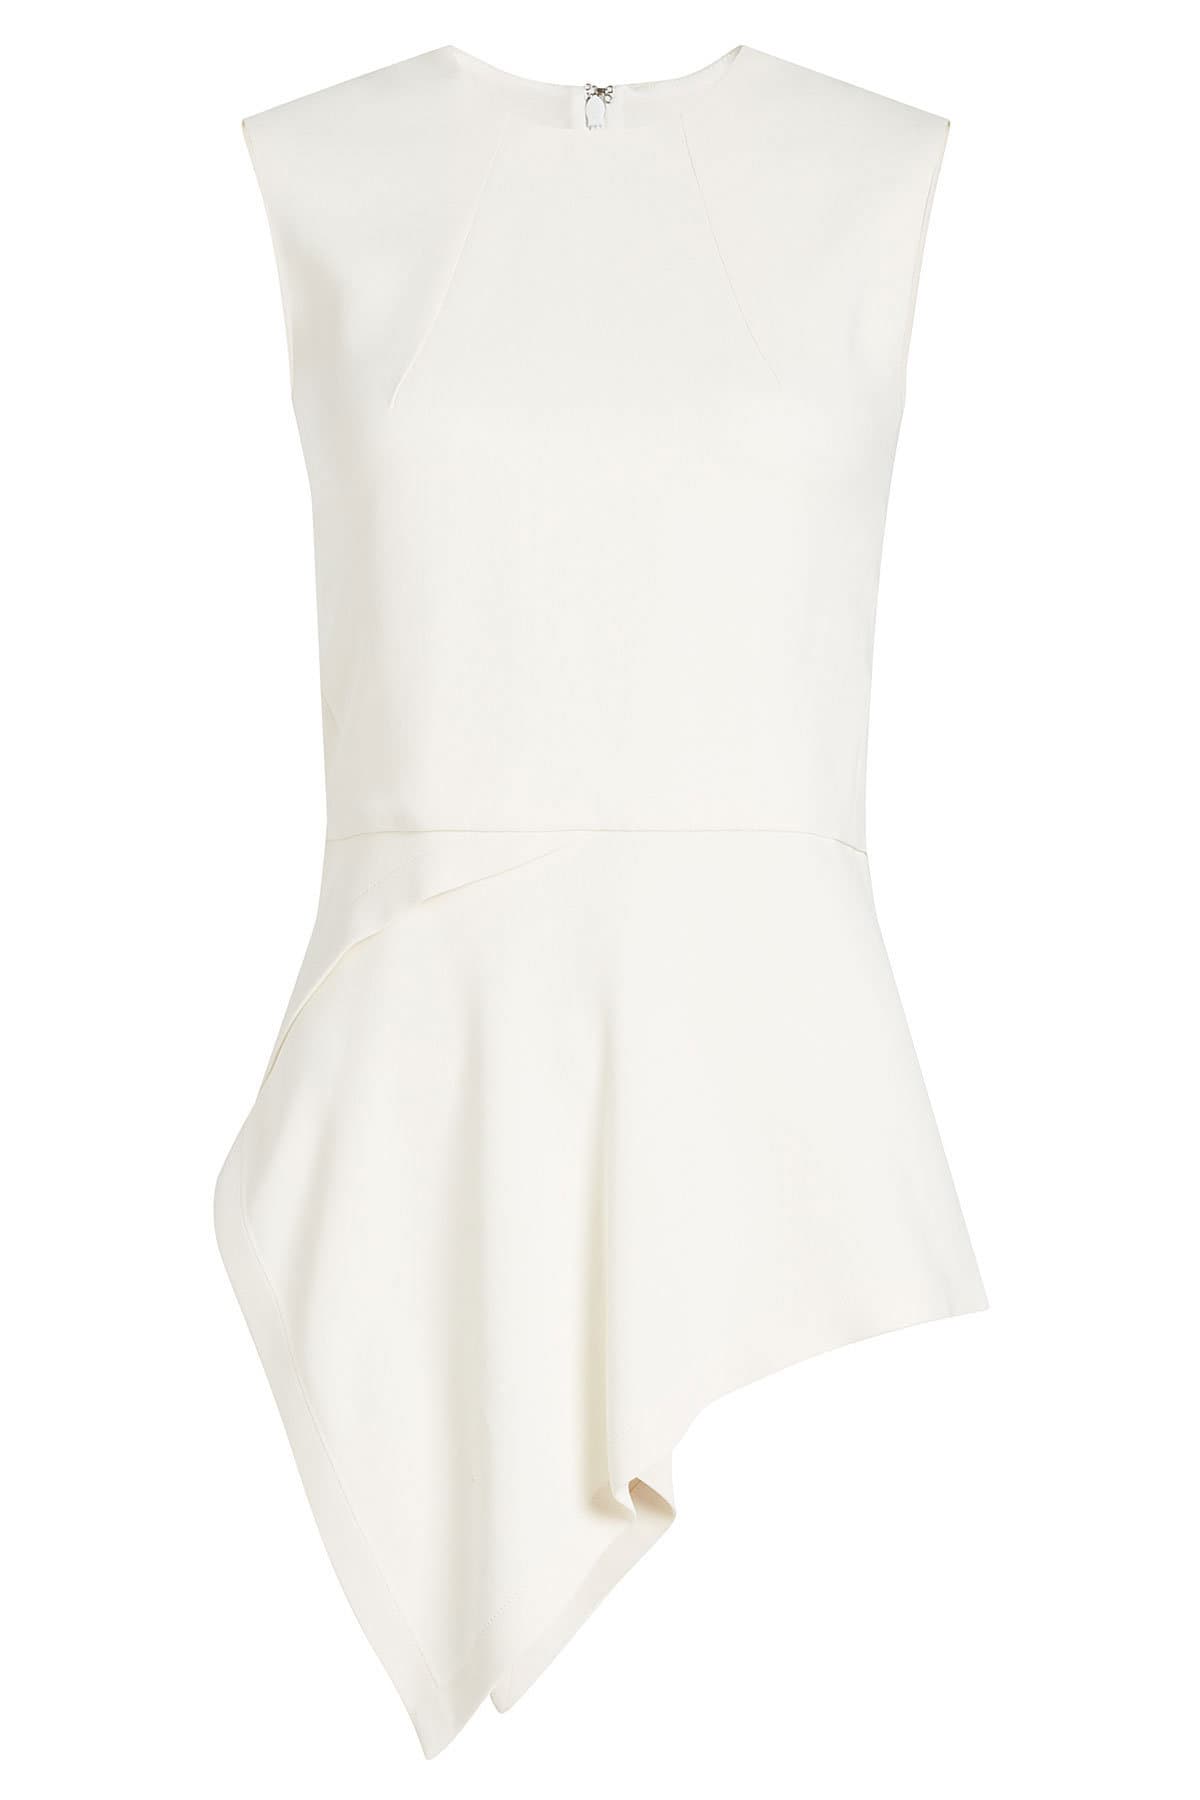 Victoria Beckham - Sleeveless Top with Draped Shoulder